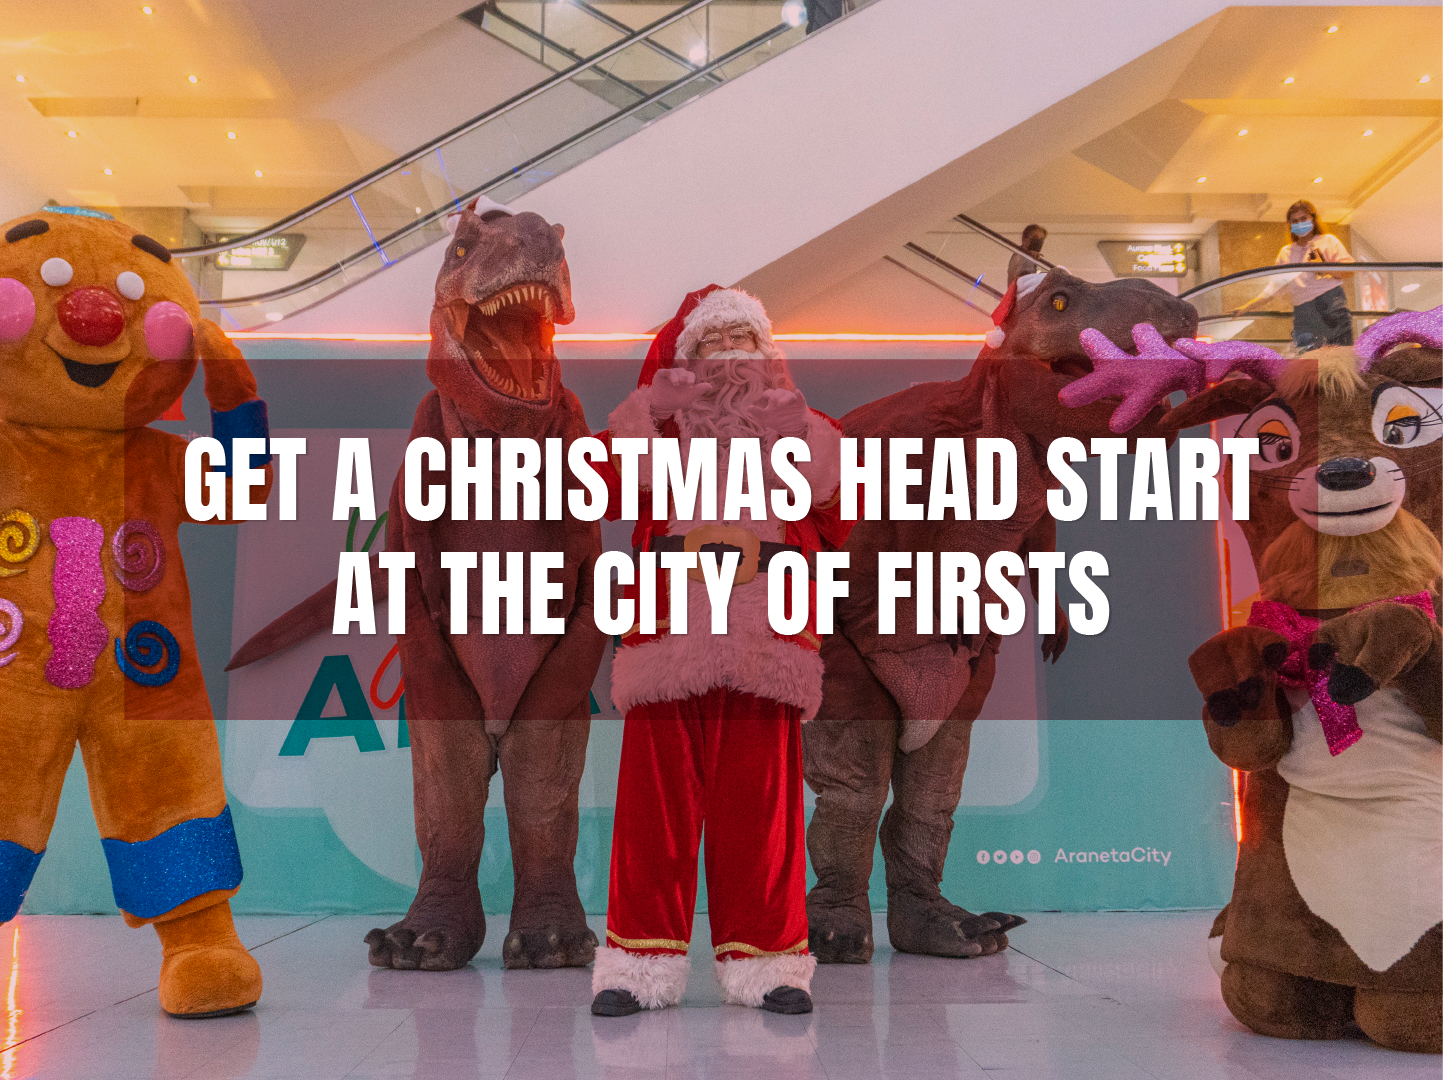 Get a Christmas head start at the City Of Firsts